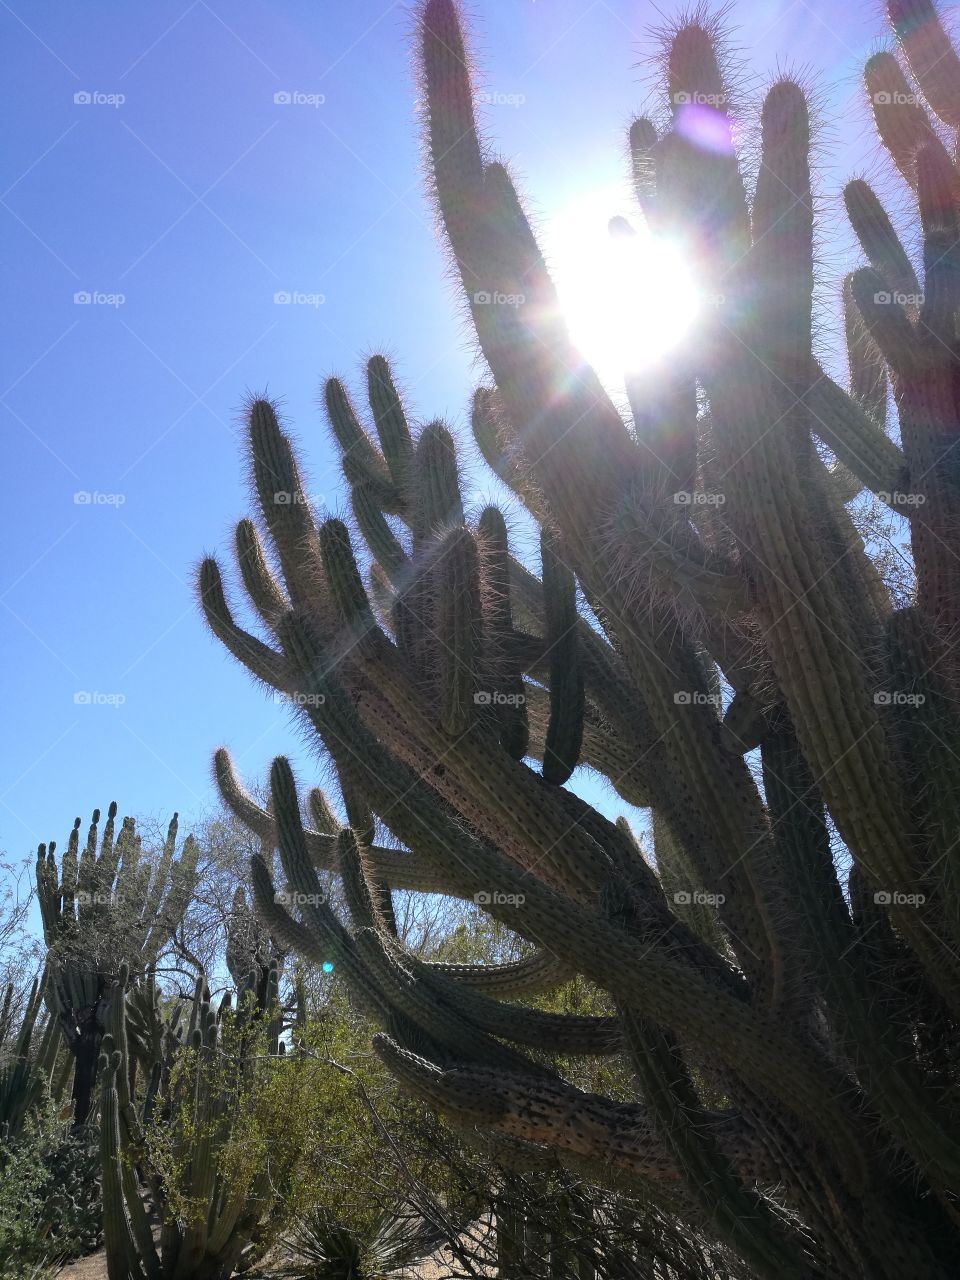 Cactus trees with sunlight and blue sky background.